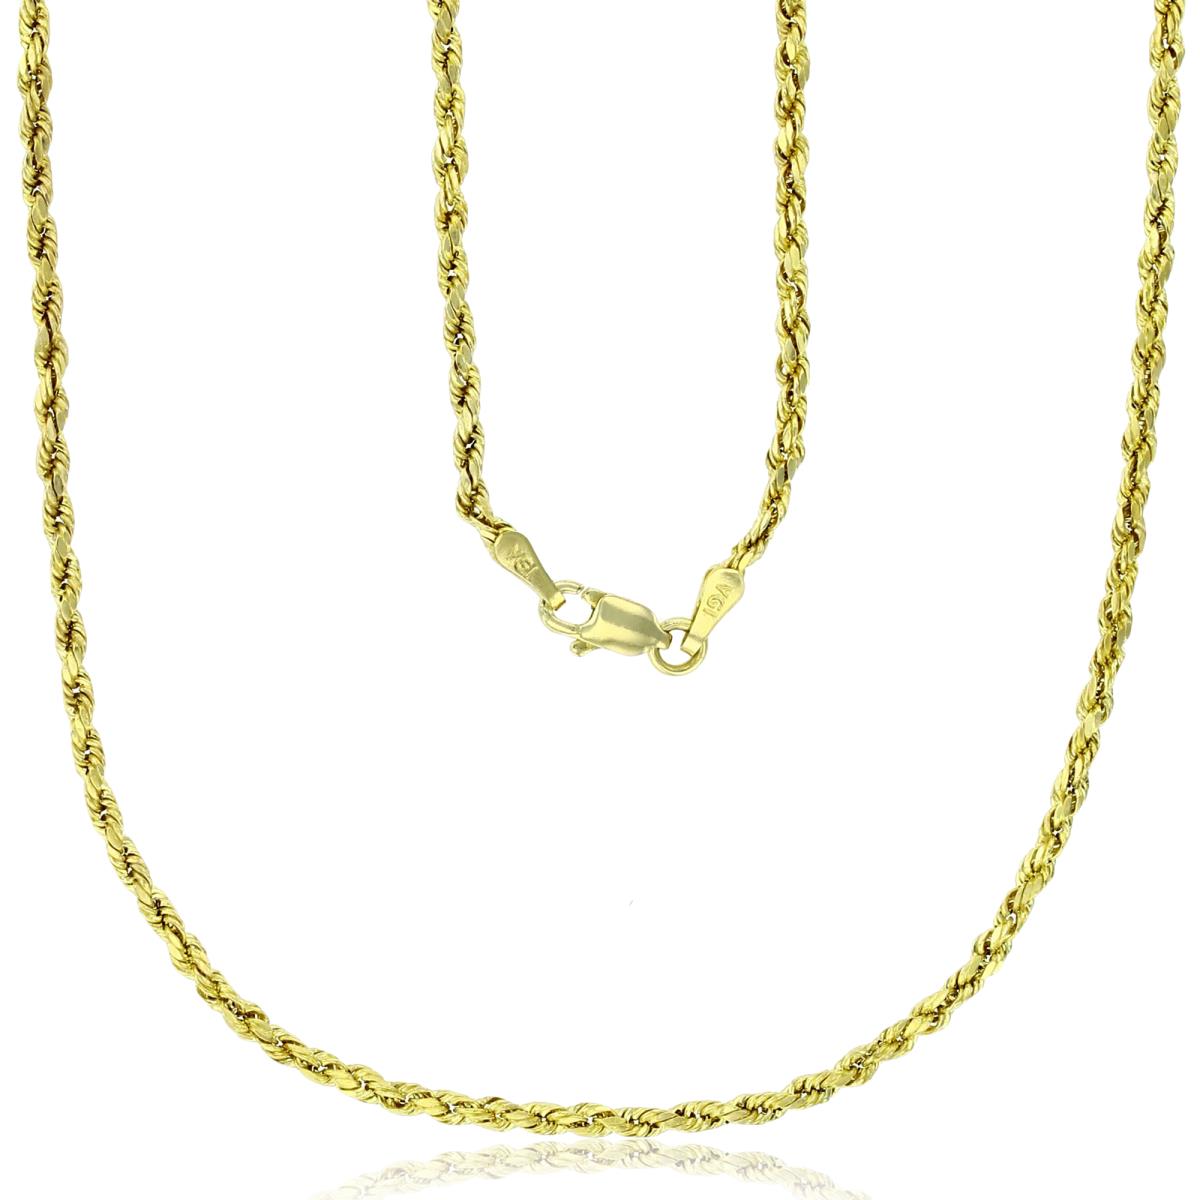 10K Yellow Gold 2.25mm 016 Superlight 16" Hollow Rope Chain